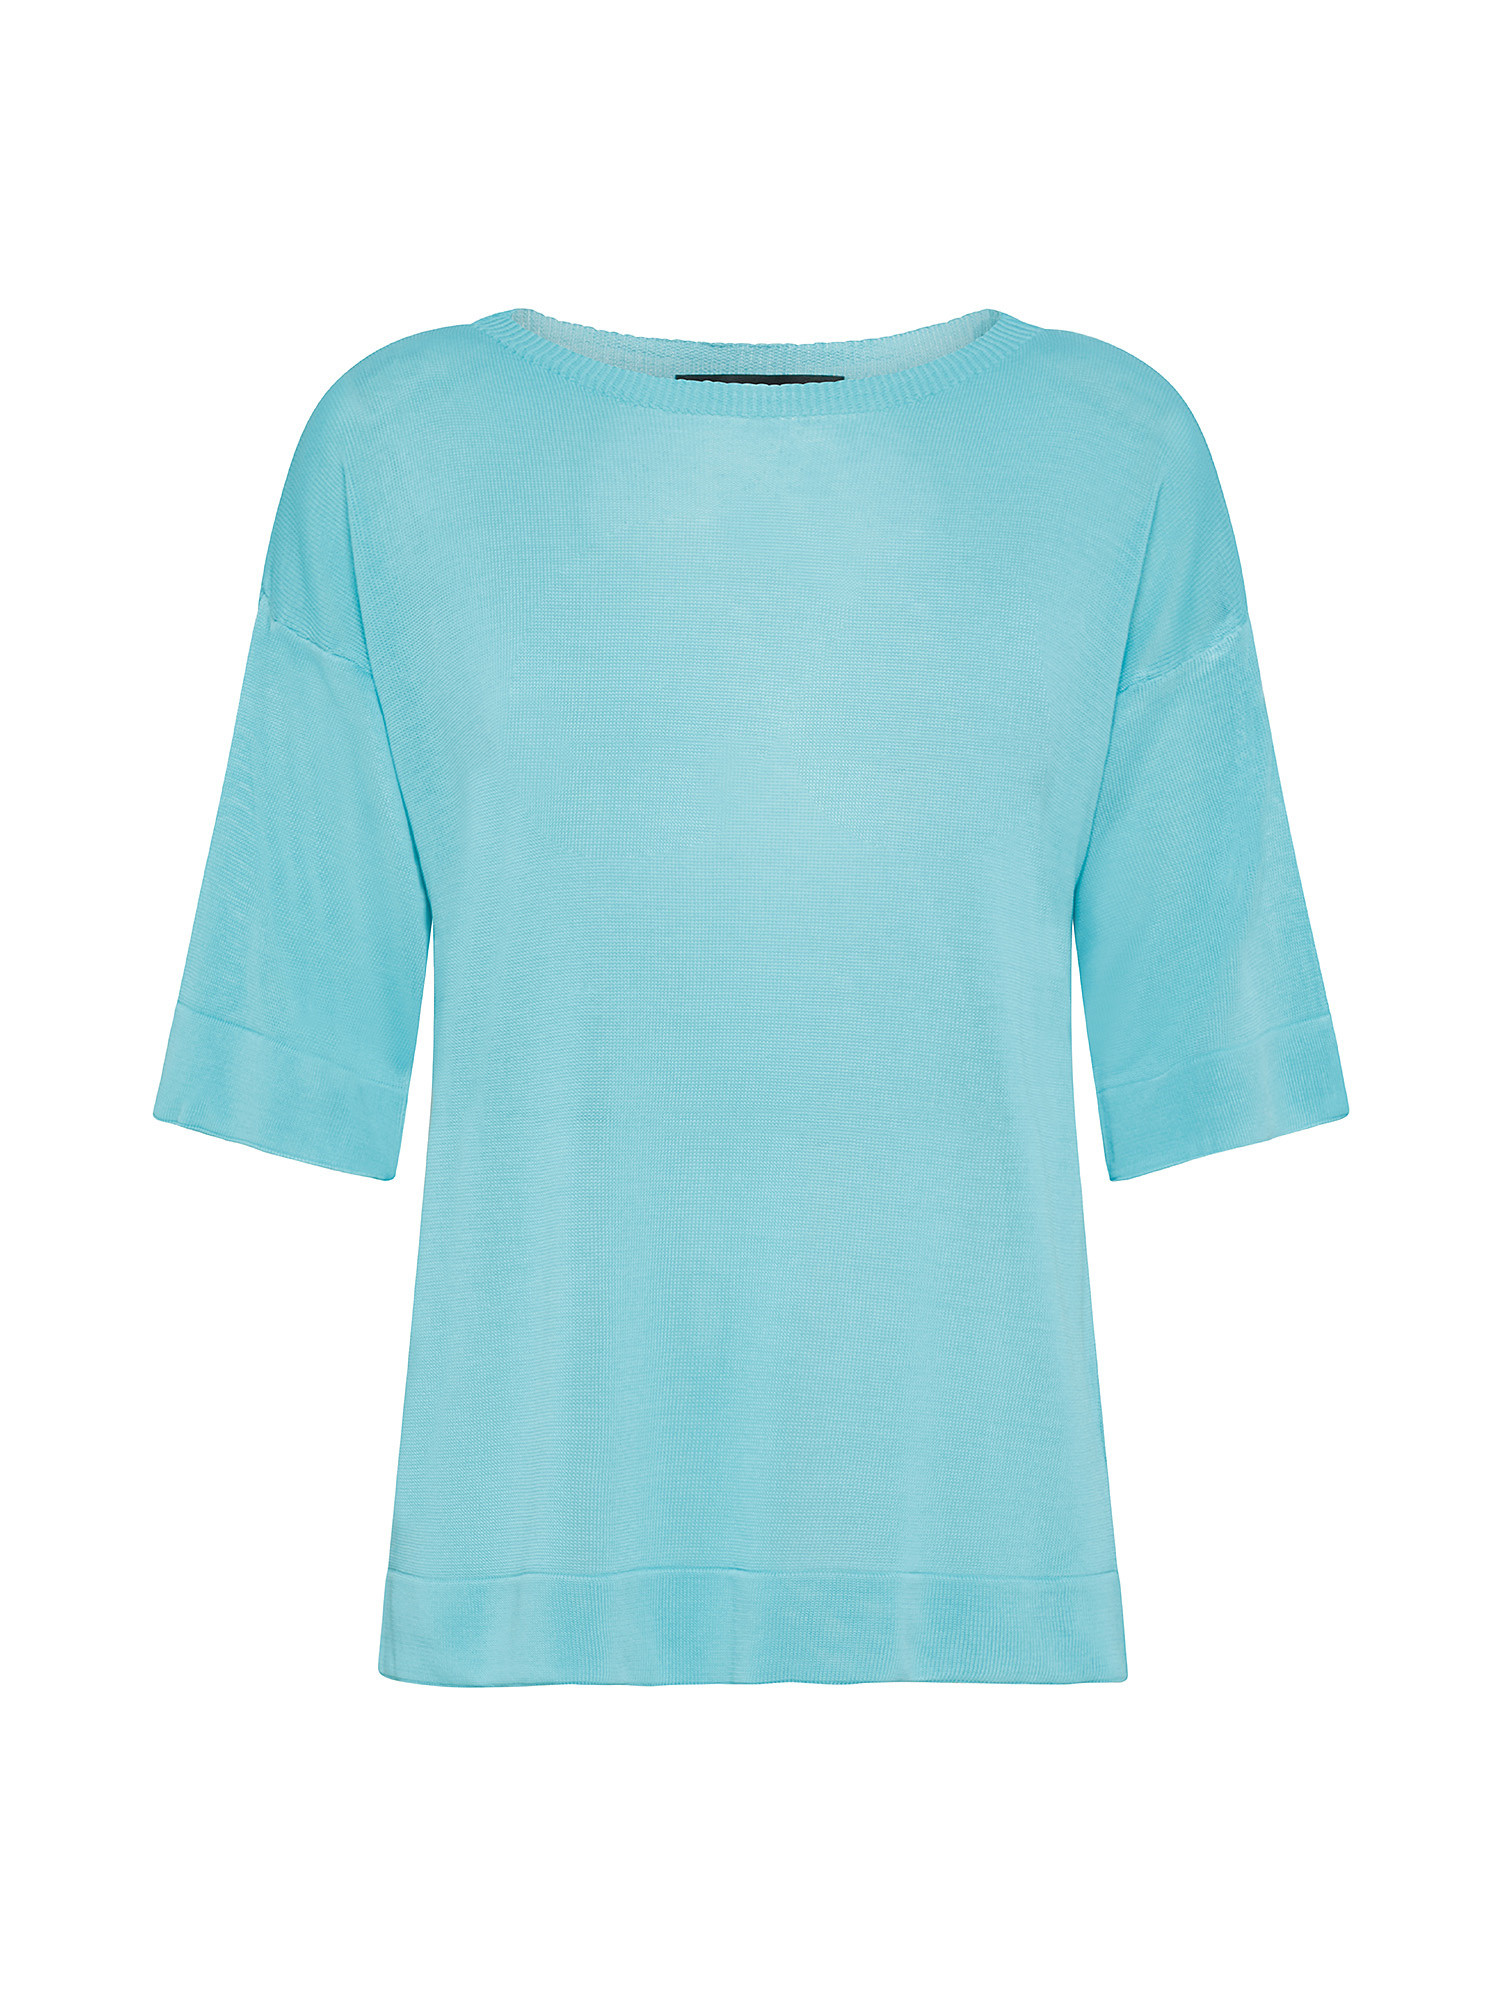 Sweater, Turquoise, large image number 0